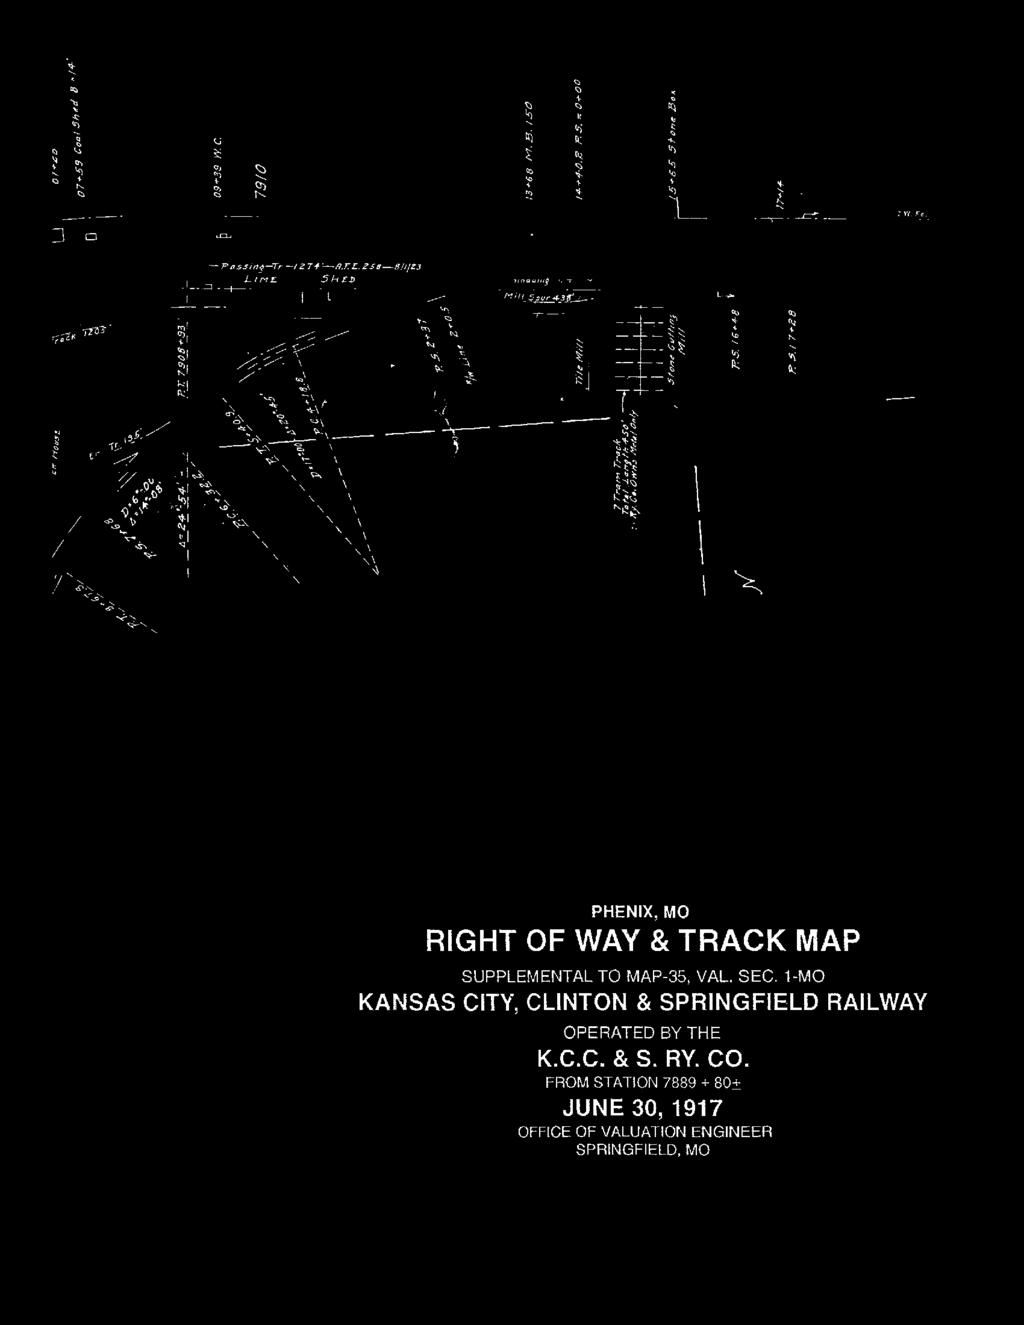 PHENIX, MO RIGHT OF WAY & TRACK MAP SUPPLEMENTAL TO MAP-35, VAL. SEC.